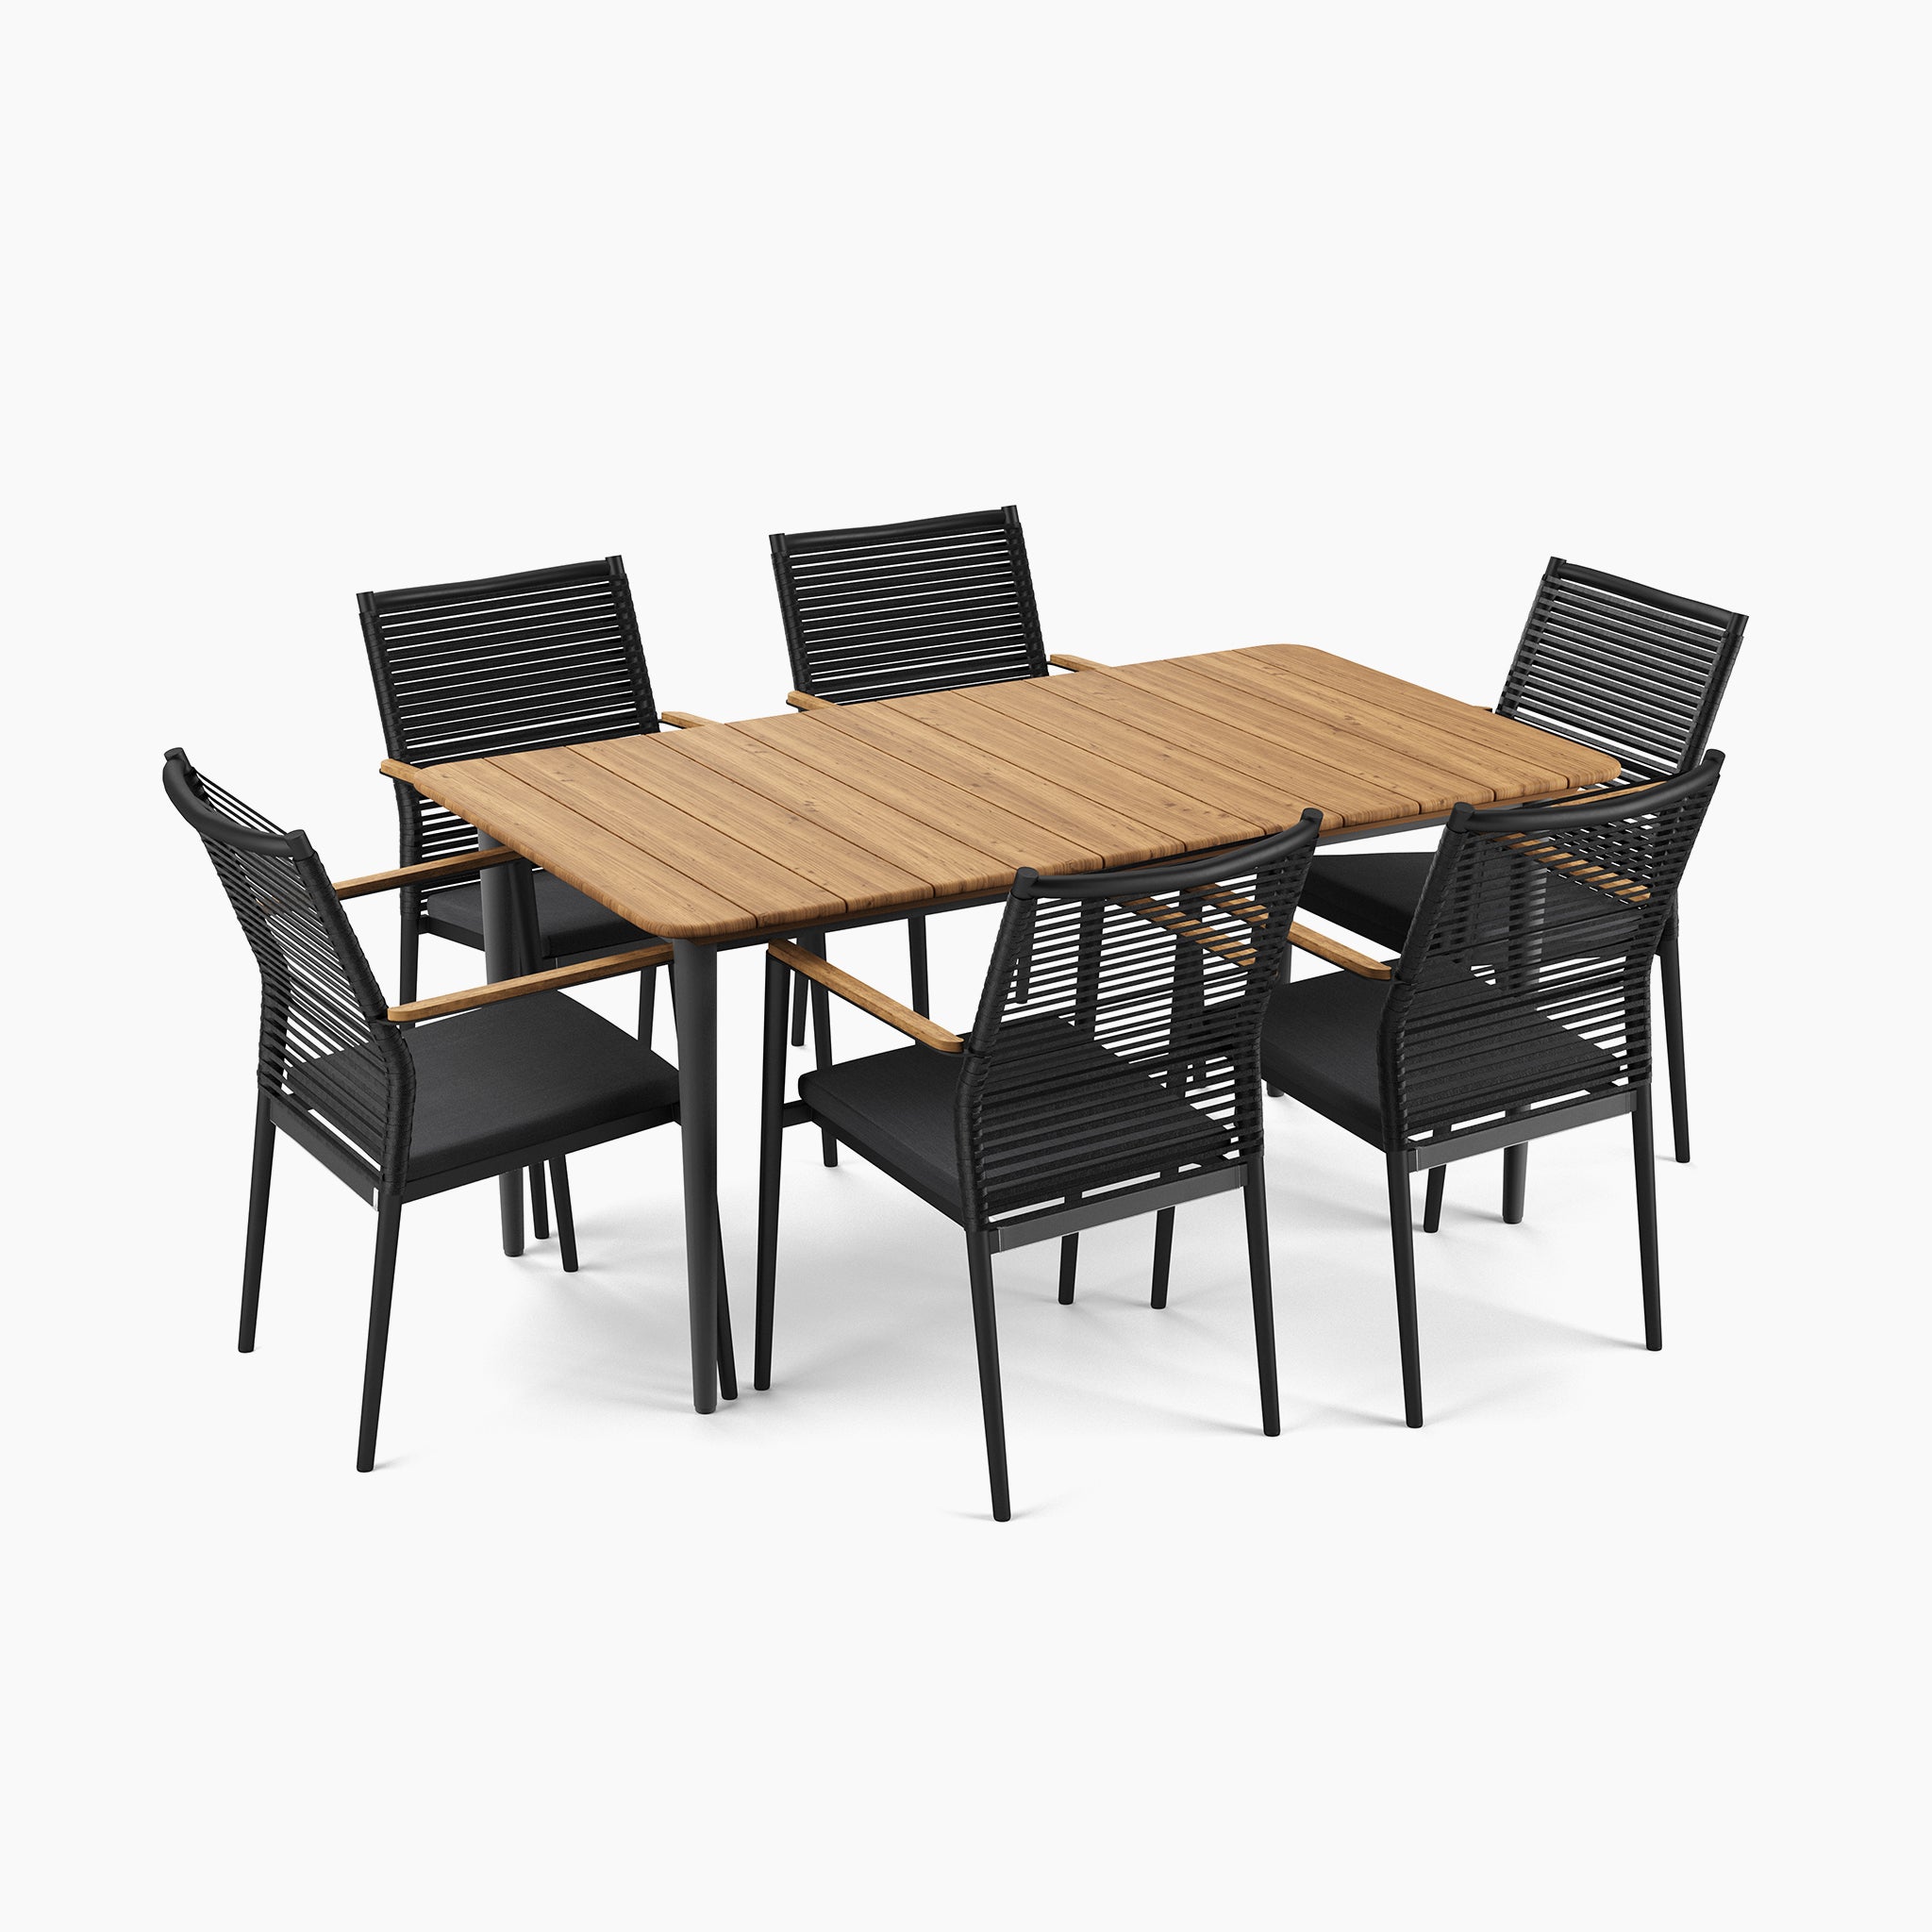 Portland 6 Seat Rectangular Dining Set with Teak Table in Charcoal